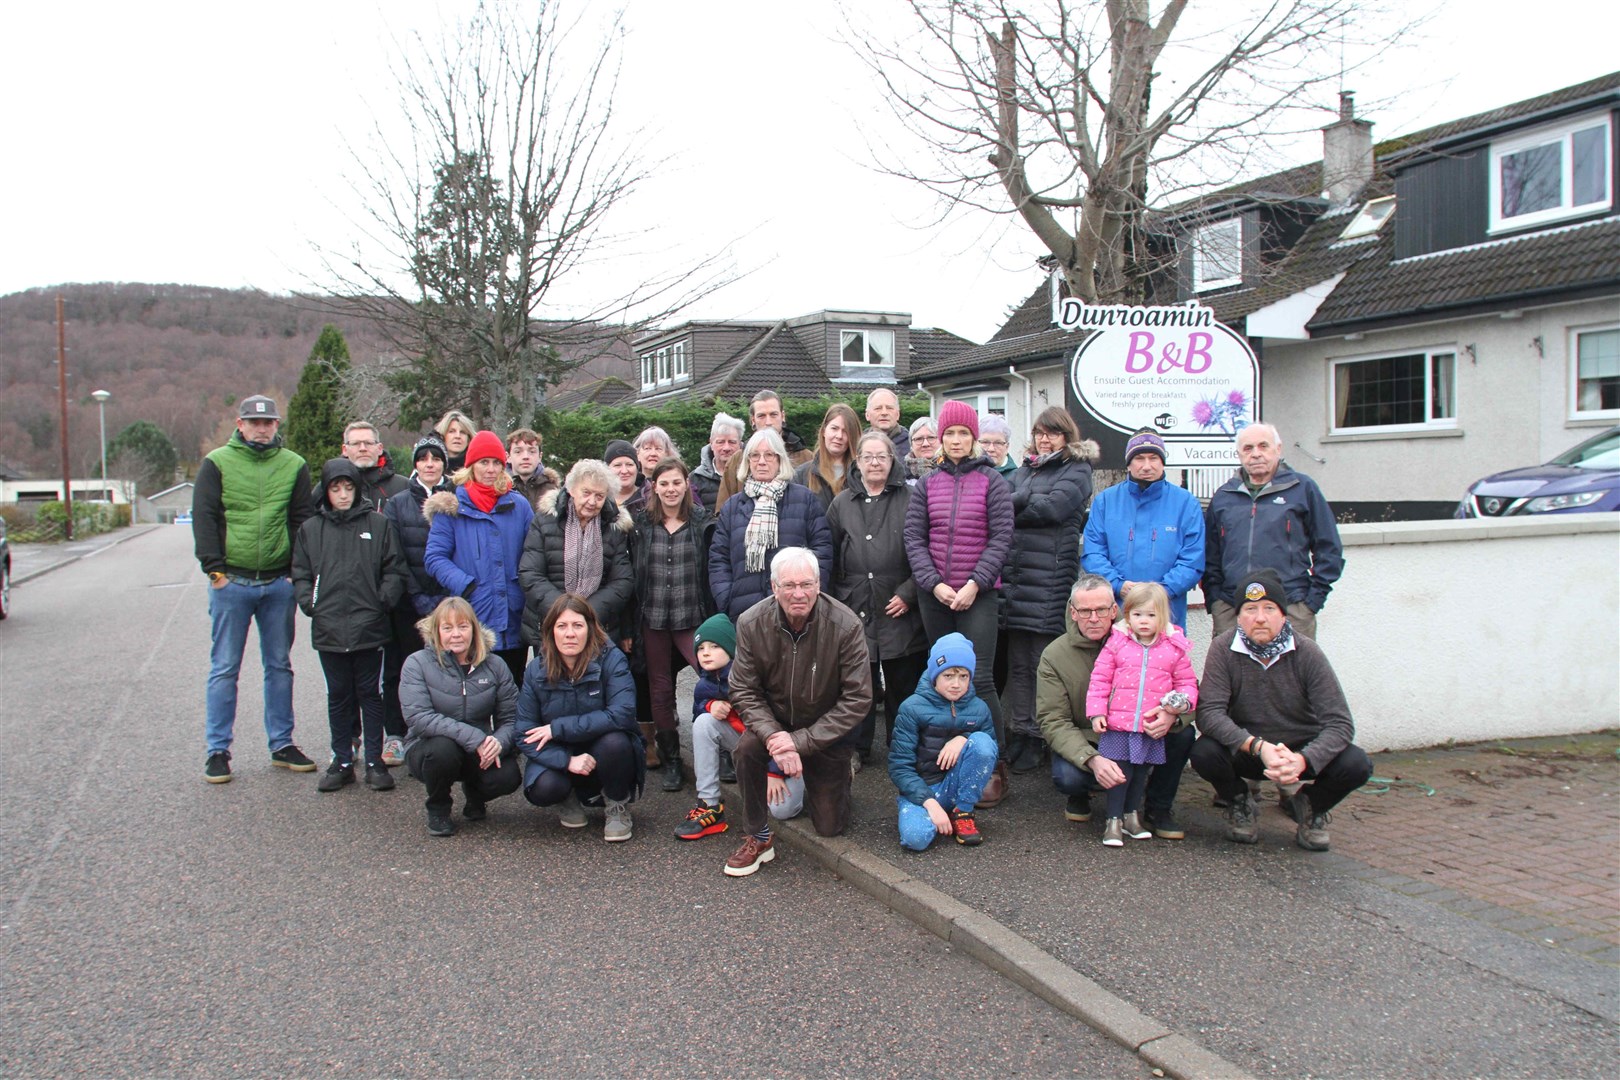 Neighbours on Craig-na-Gower Avenue in Aviemore are concerned by plans for the combined development on the sites occupied by Dunroamin and Vermont guest houses.